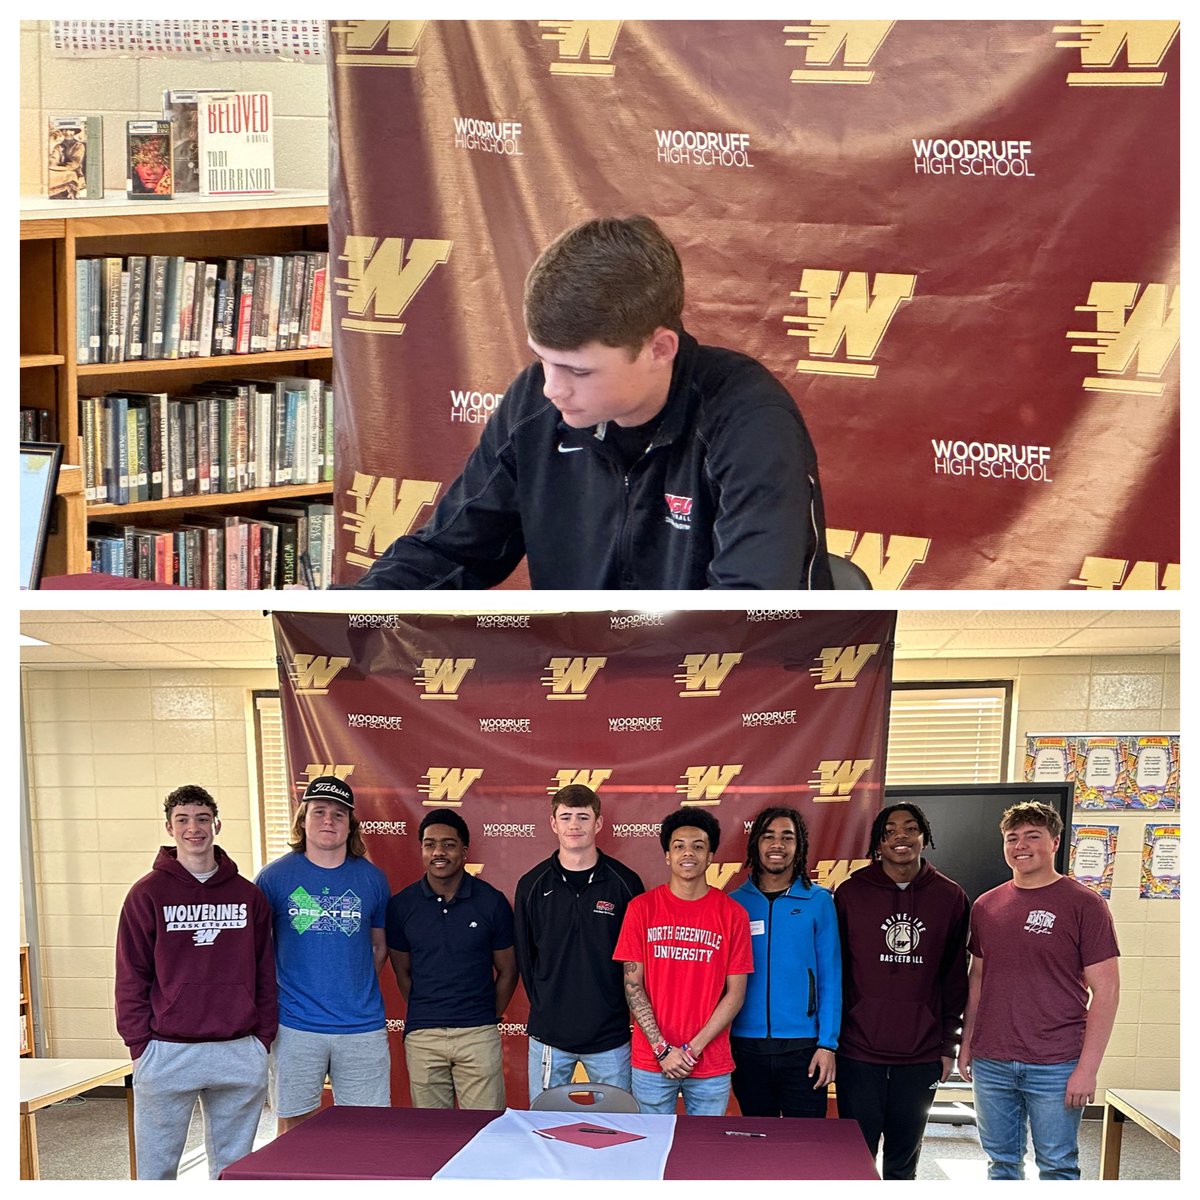 Congratulations to @_Kory_Scott and @mhorton_2 on signing with @NGUFootball1 today. The Crusaders are getting two good ones from @WoodruffFB @CoachTA6 @CoachSettle15 @kidtomas2727 @baseball6u @bluehose_53 #MakeEmBelieve